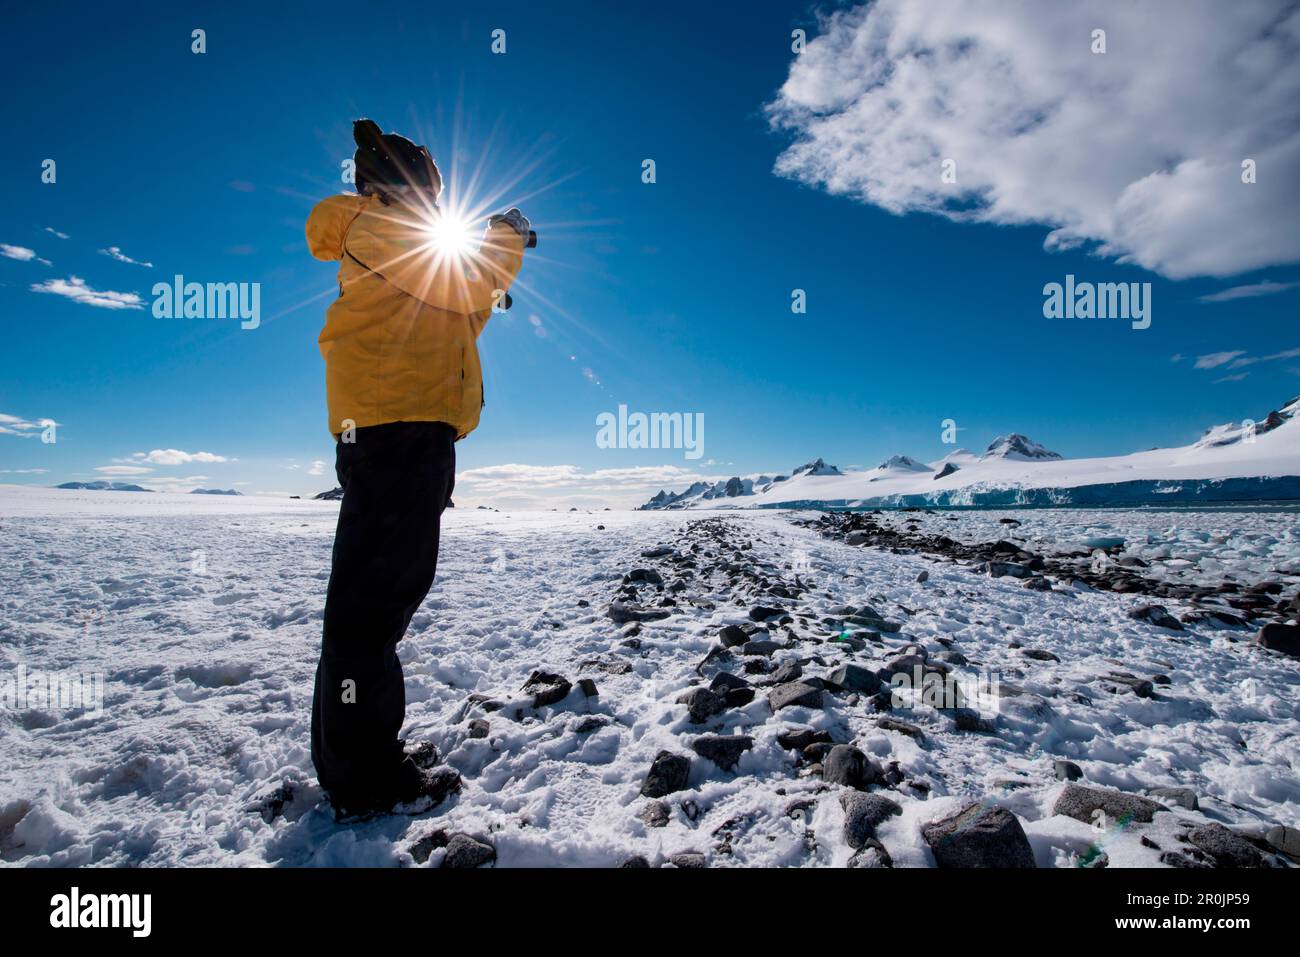 Woman in yellow expedition parka stands on ice field and takes a photograph, Half Moon Island, South Shetland Islands, Antarctica Stock Photo